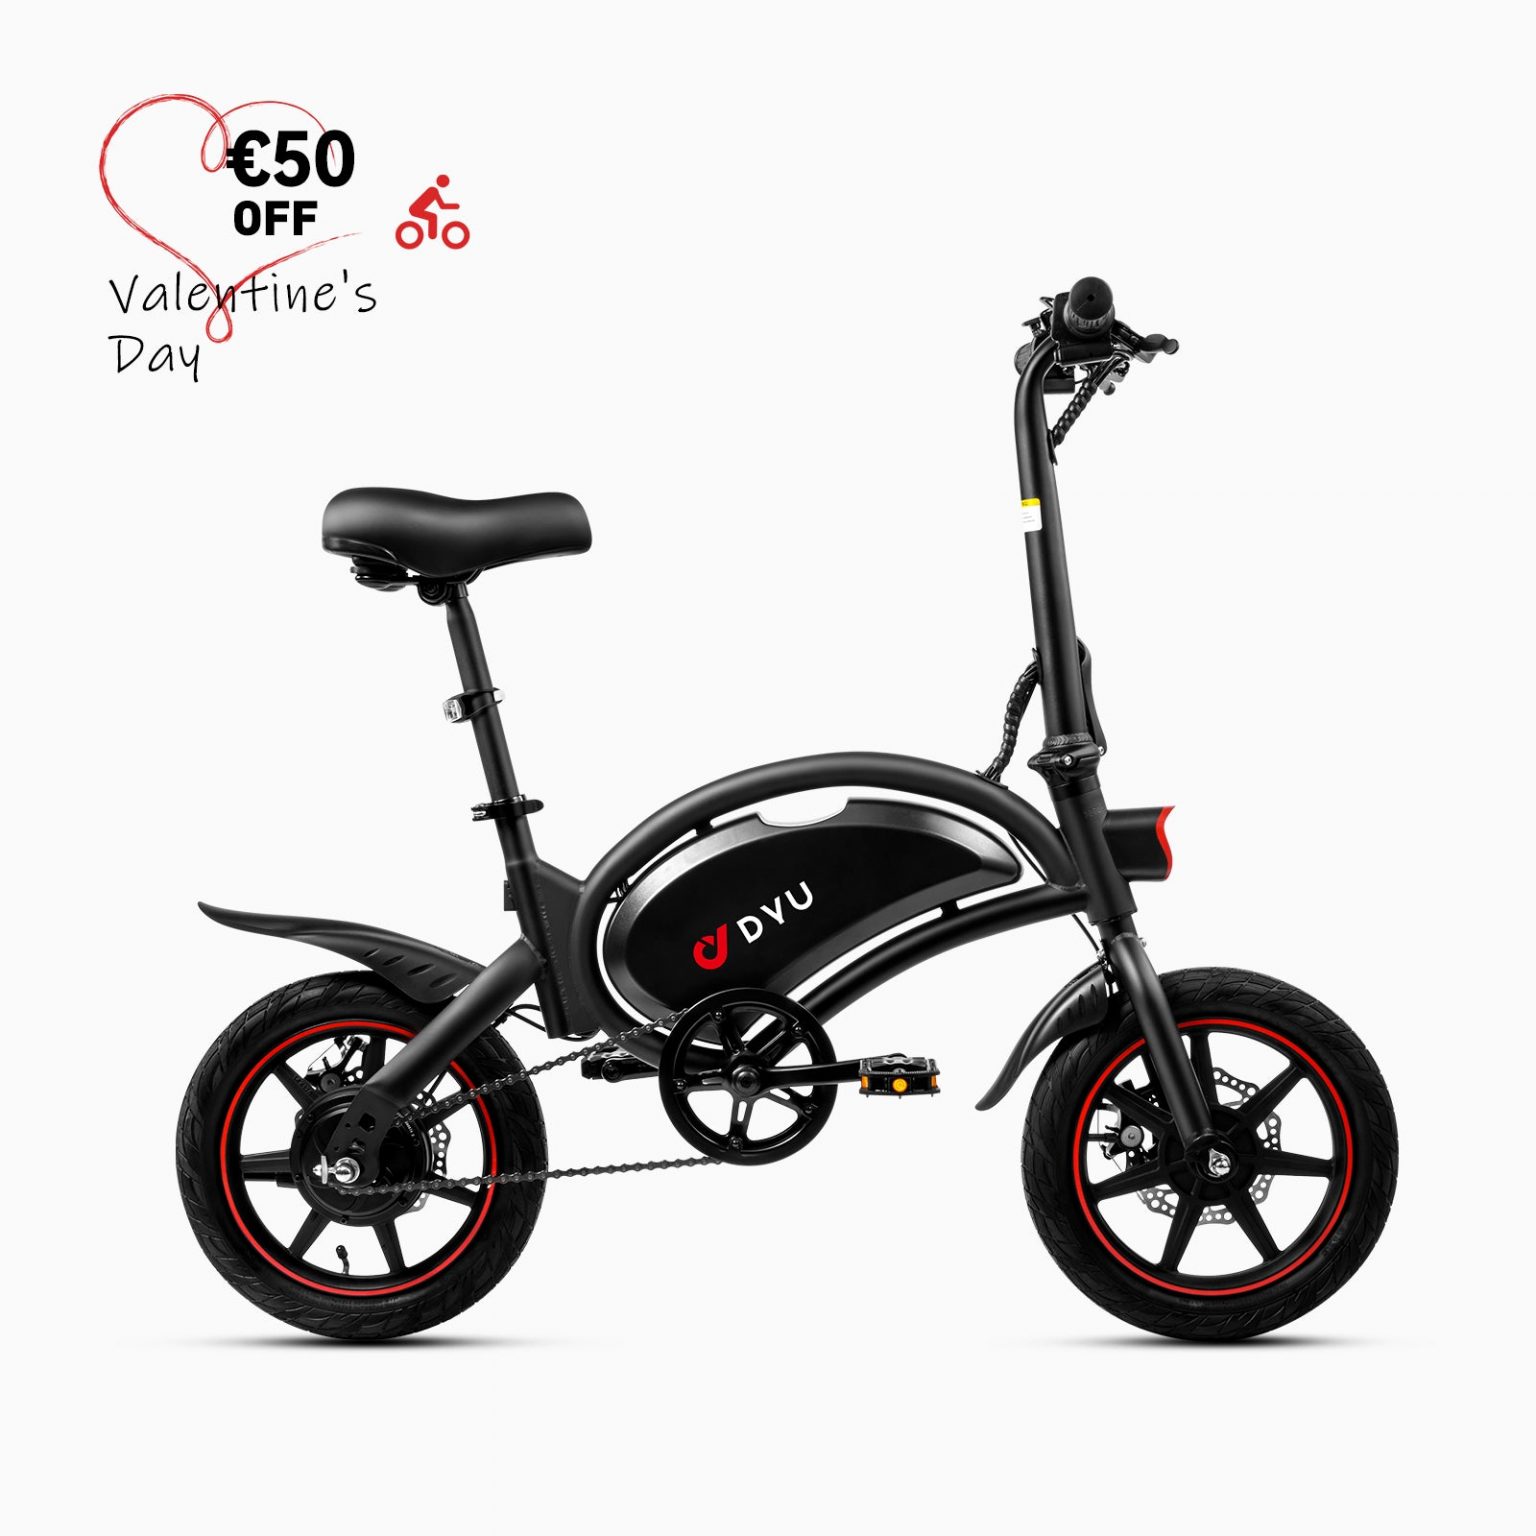 DYU Ebike is offering all-time low prices and up to 30% off for ...